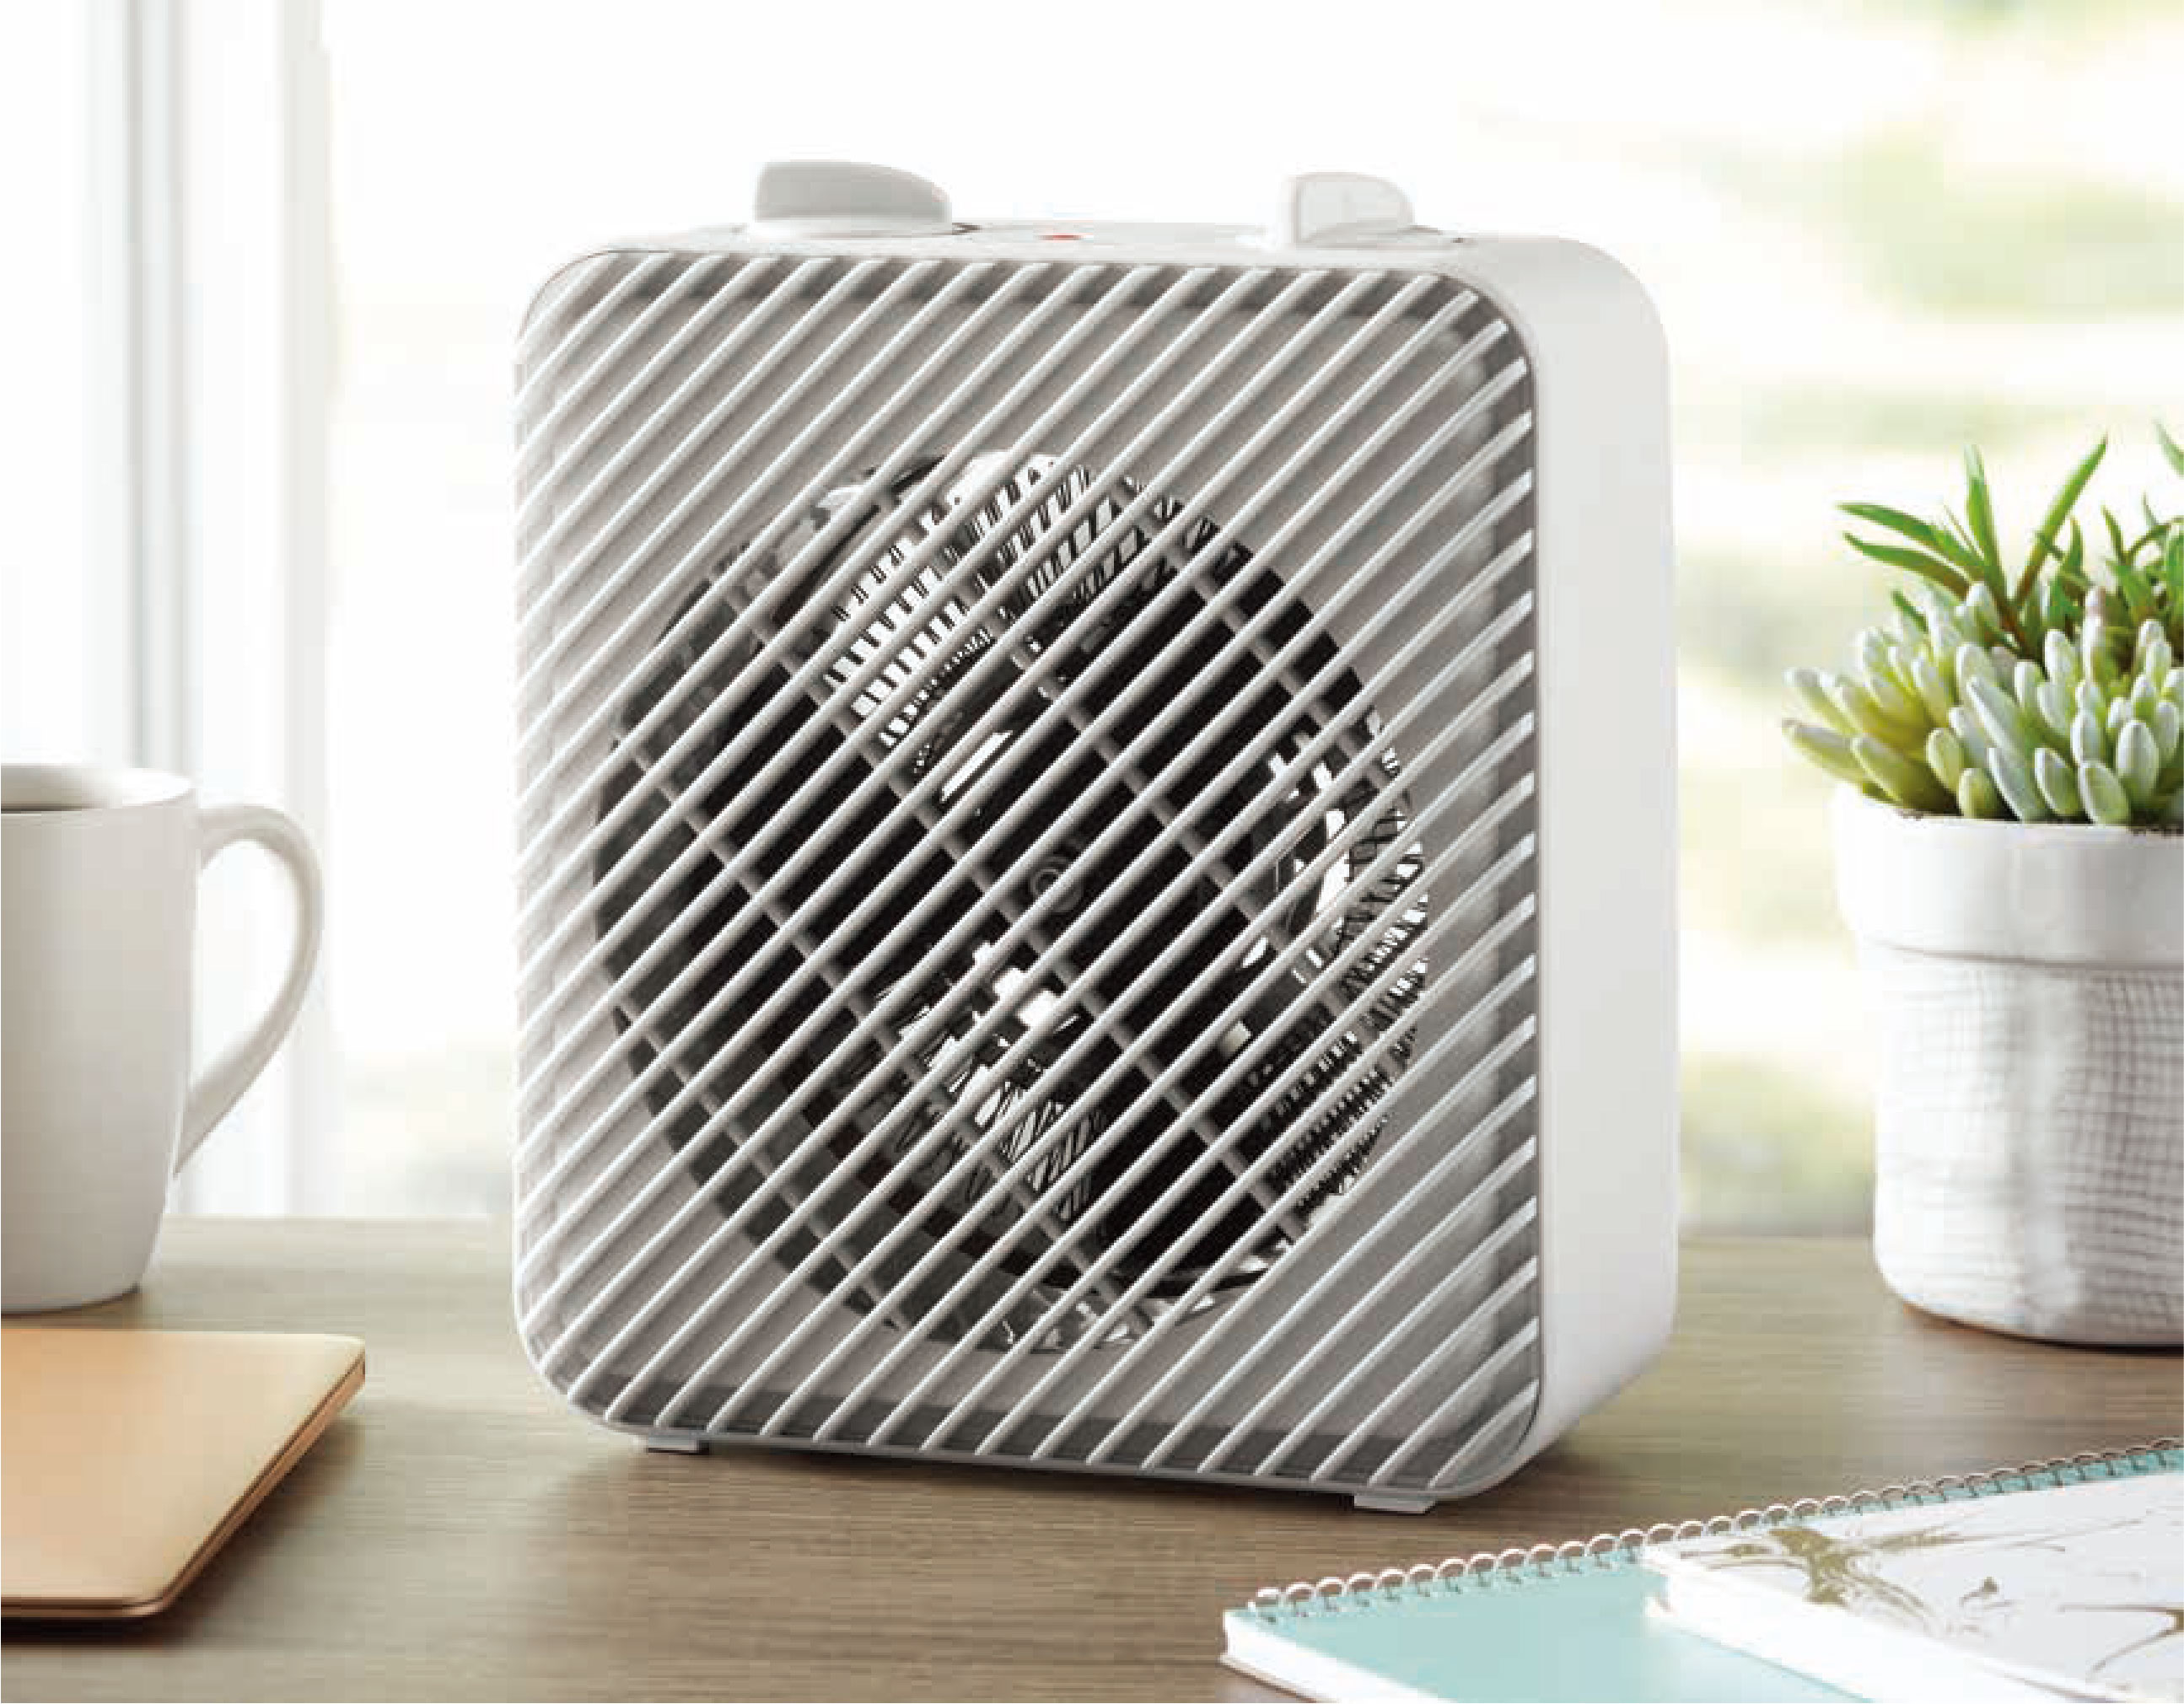 Mainstays 1500W 3-Speed Electric Fan-Forced Space Heater with Adjustable Thermostat, White - image 2 of 9